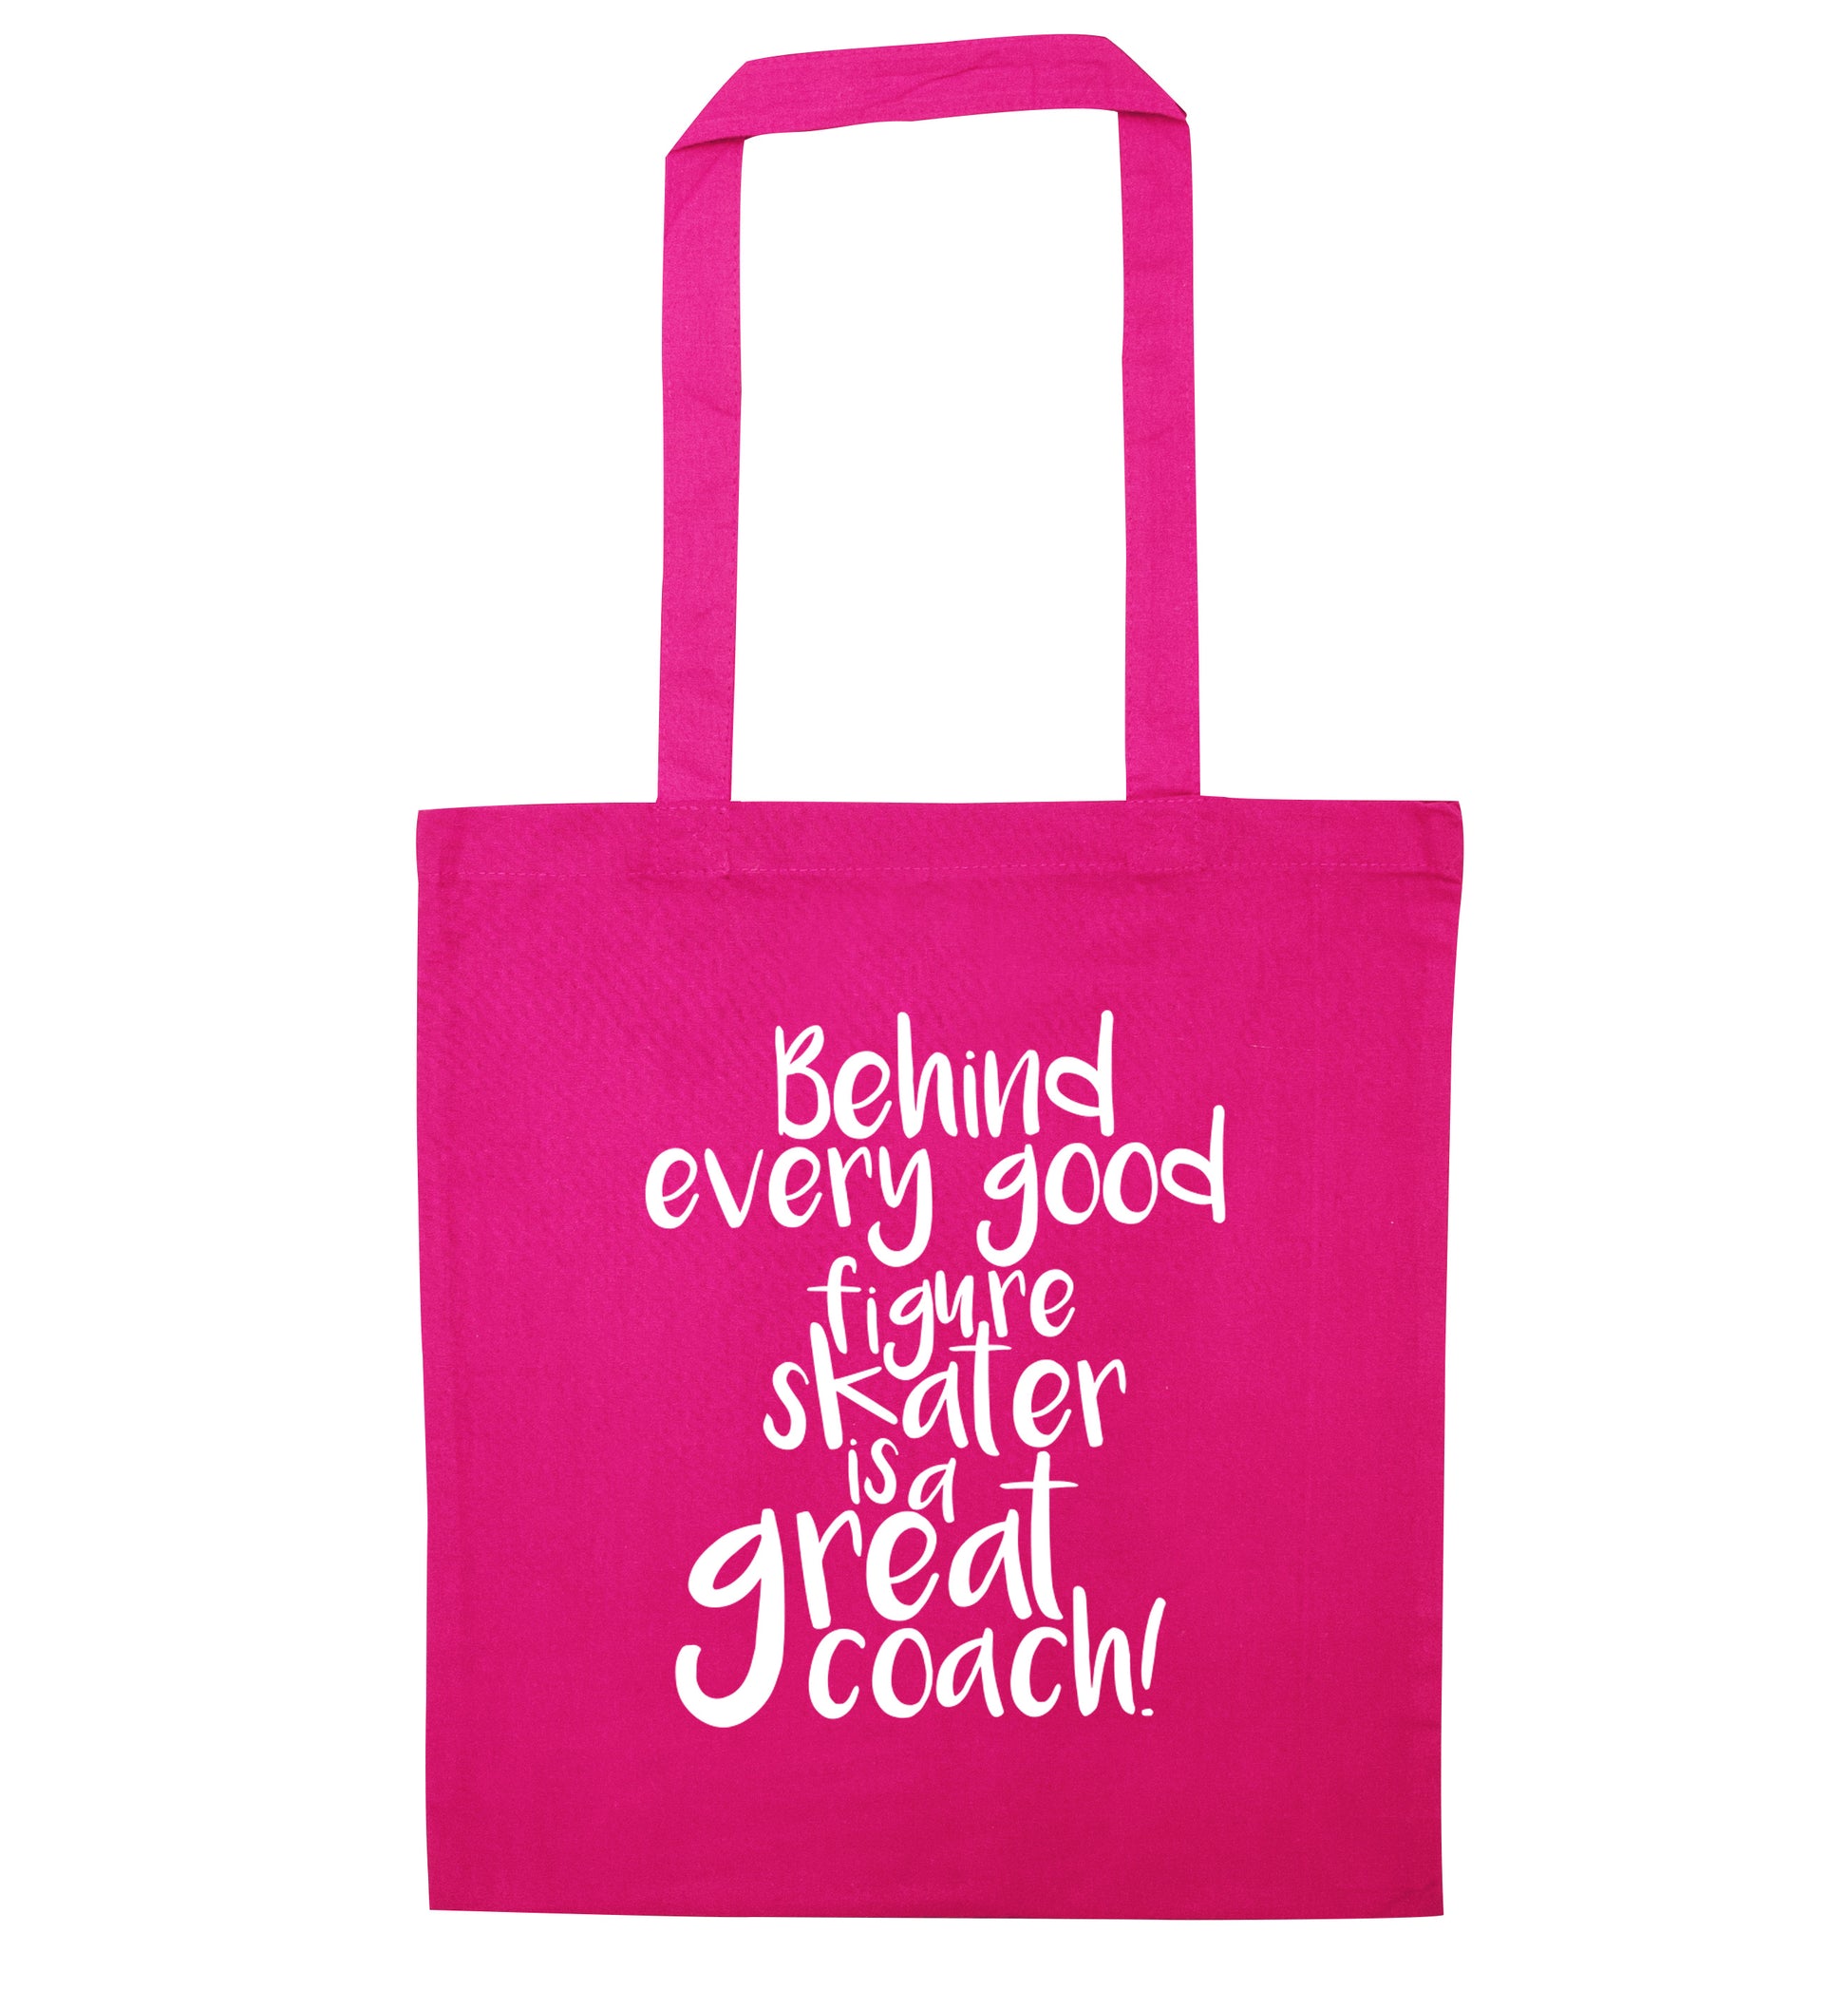 Behind every good figure skater is a great coach pink tote bag